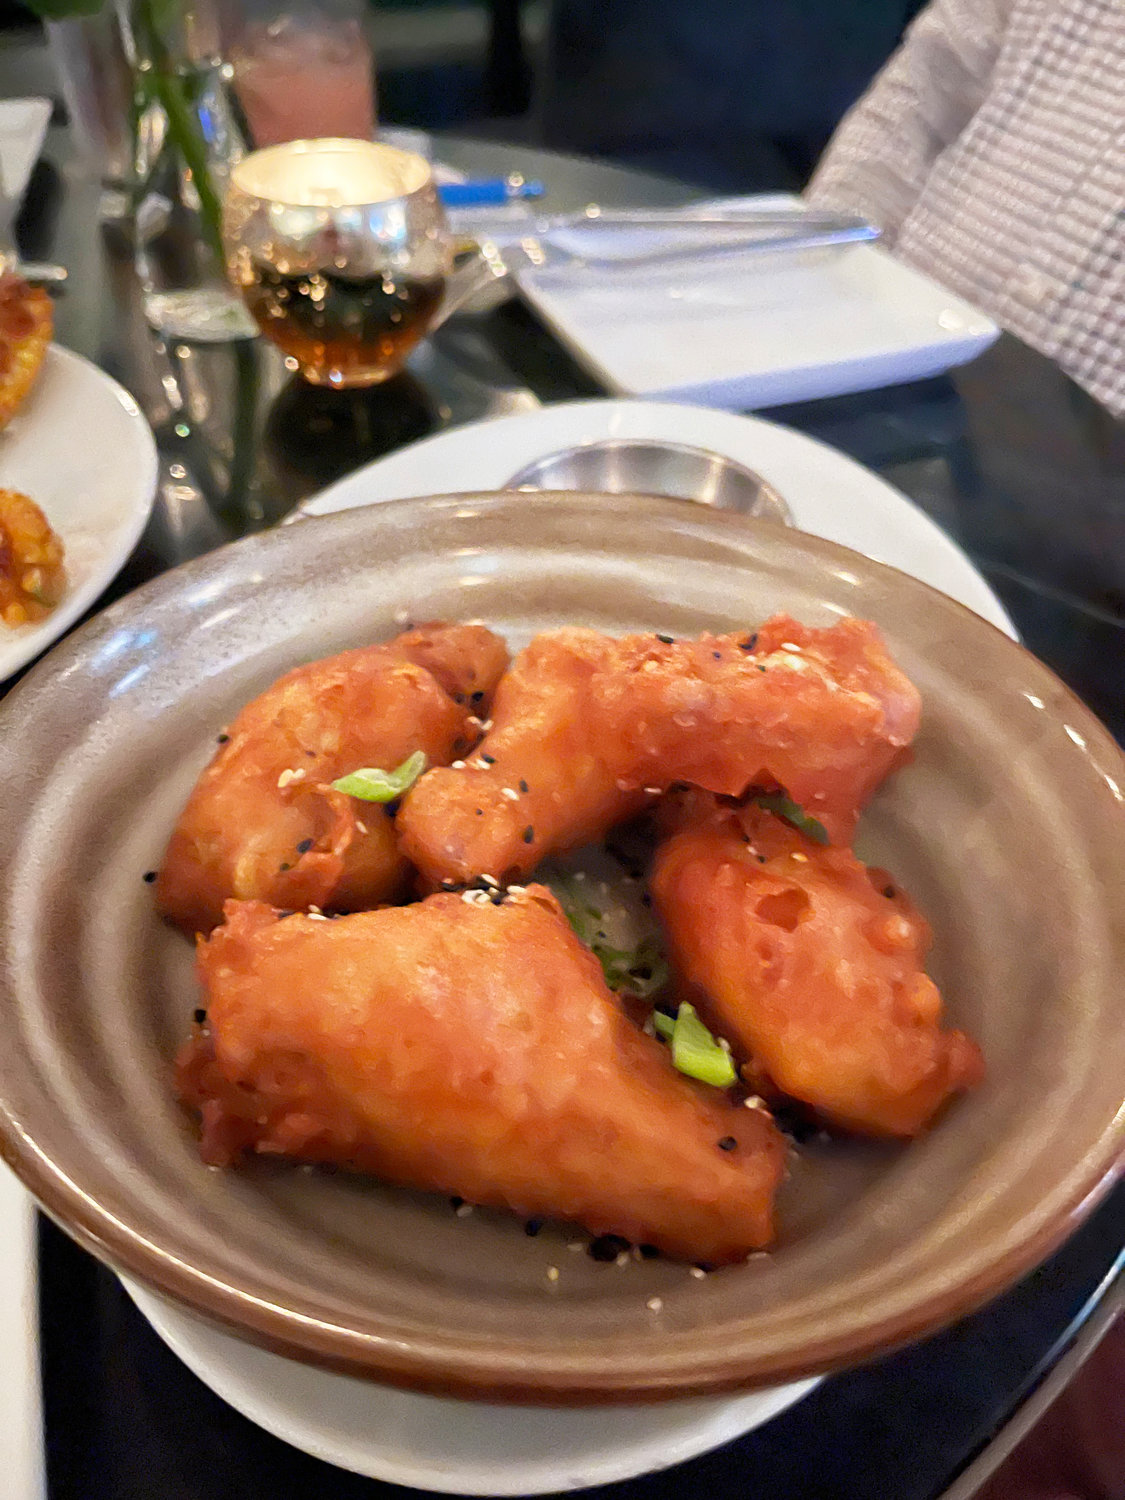 The chicken wings are coated in a light tempura batter and served with a Korean chili glaze.